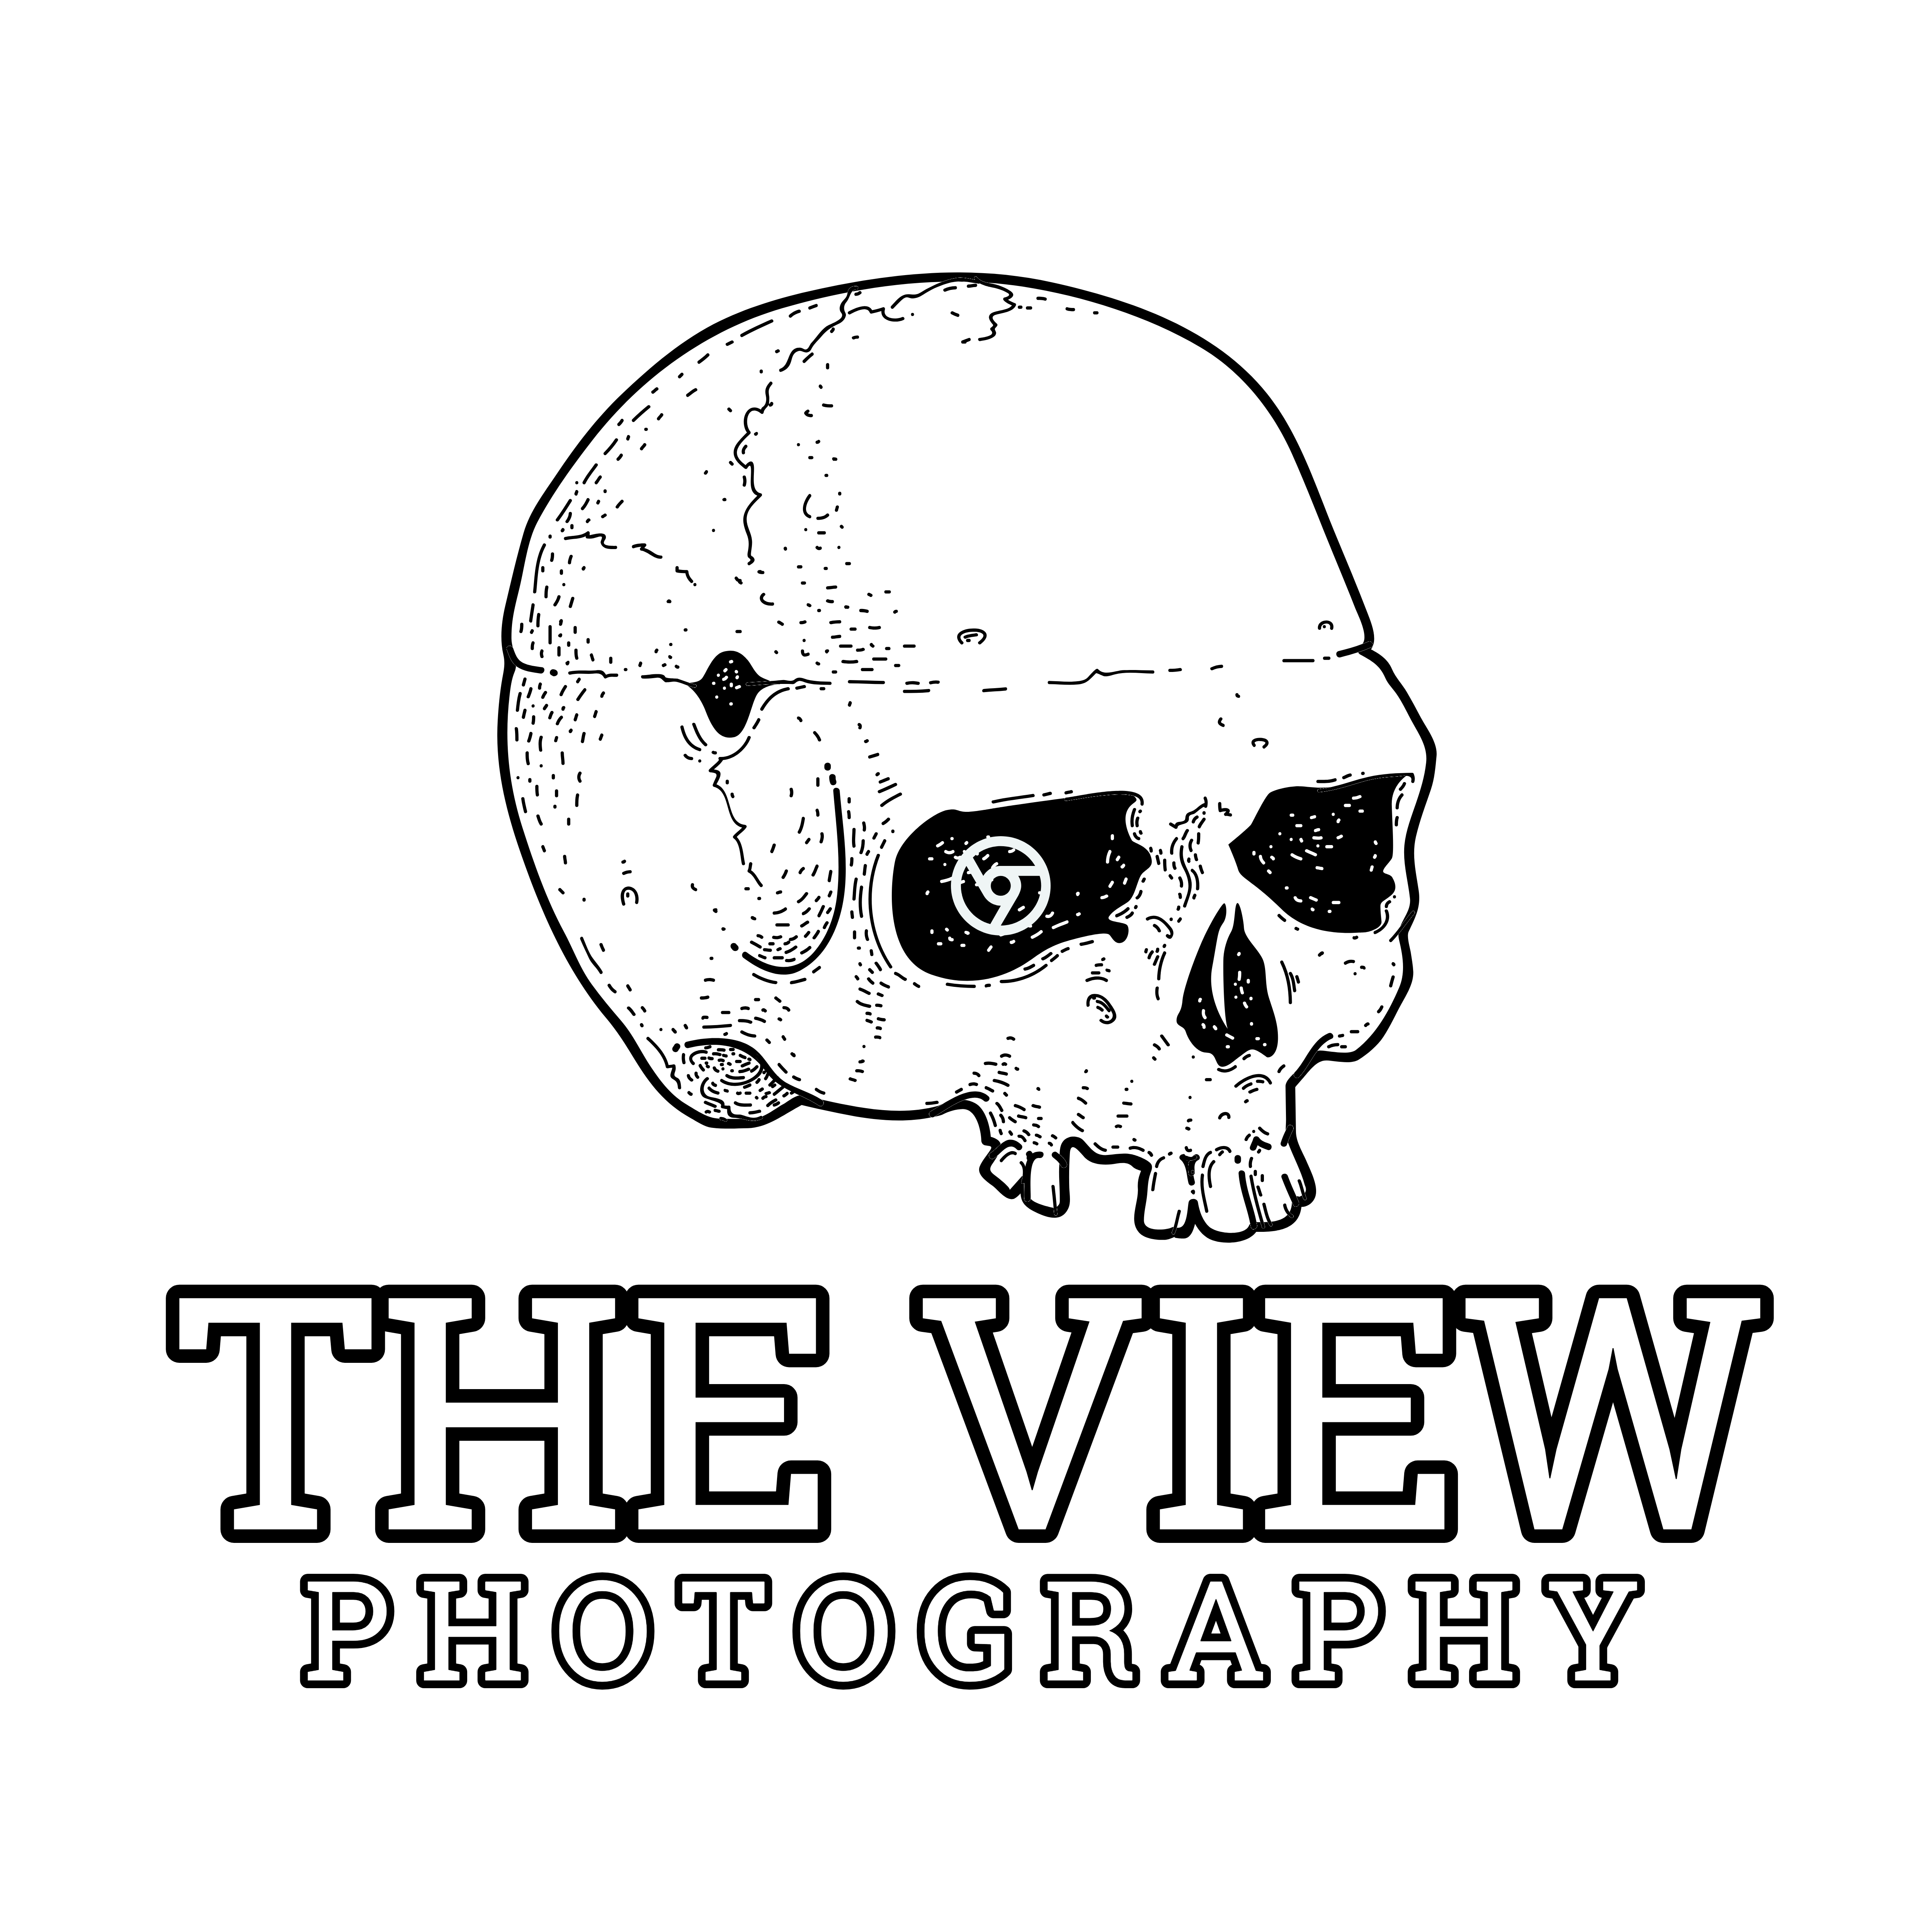 The View Photography